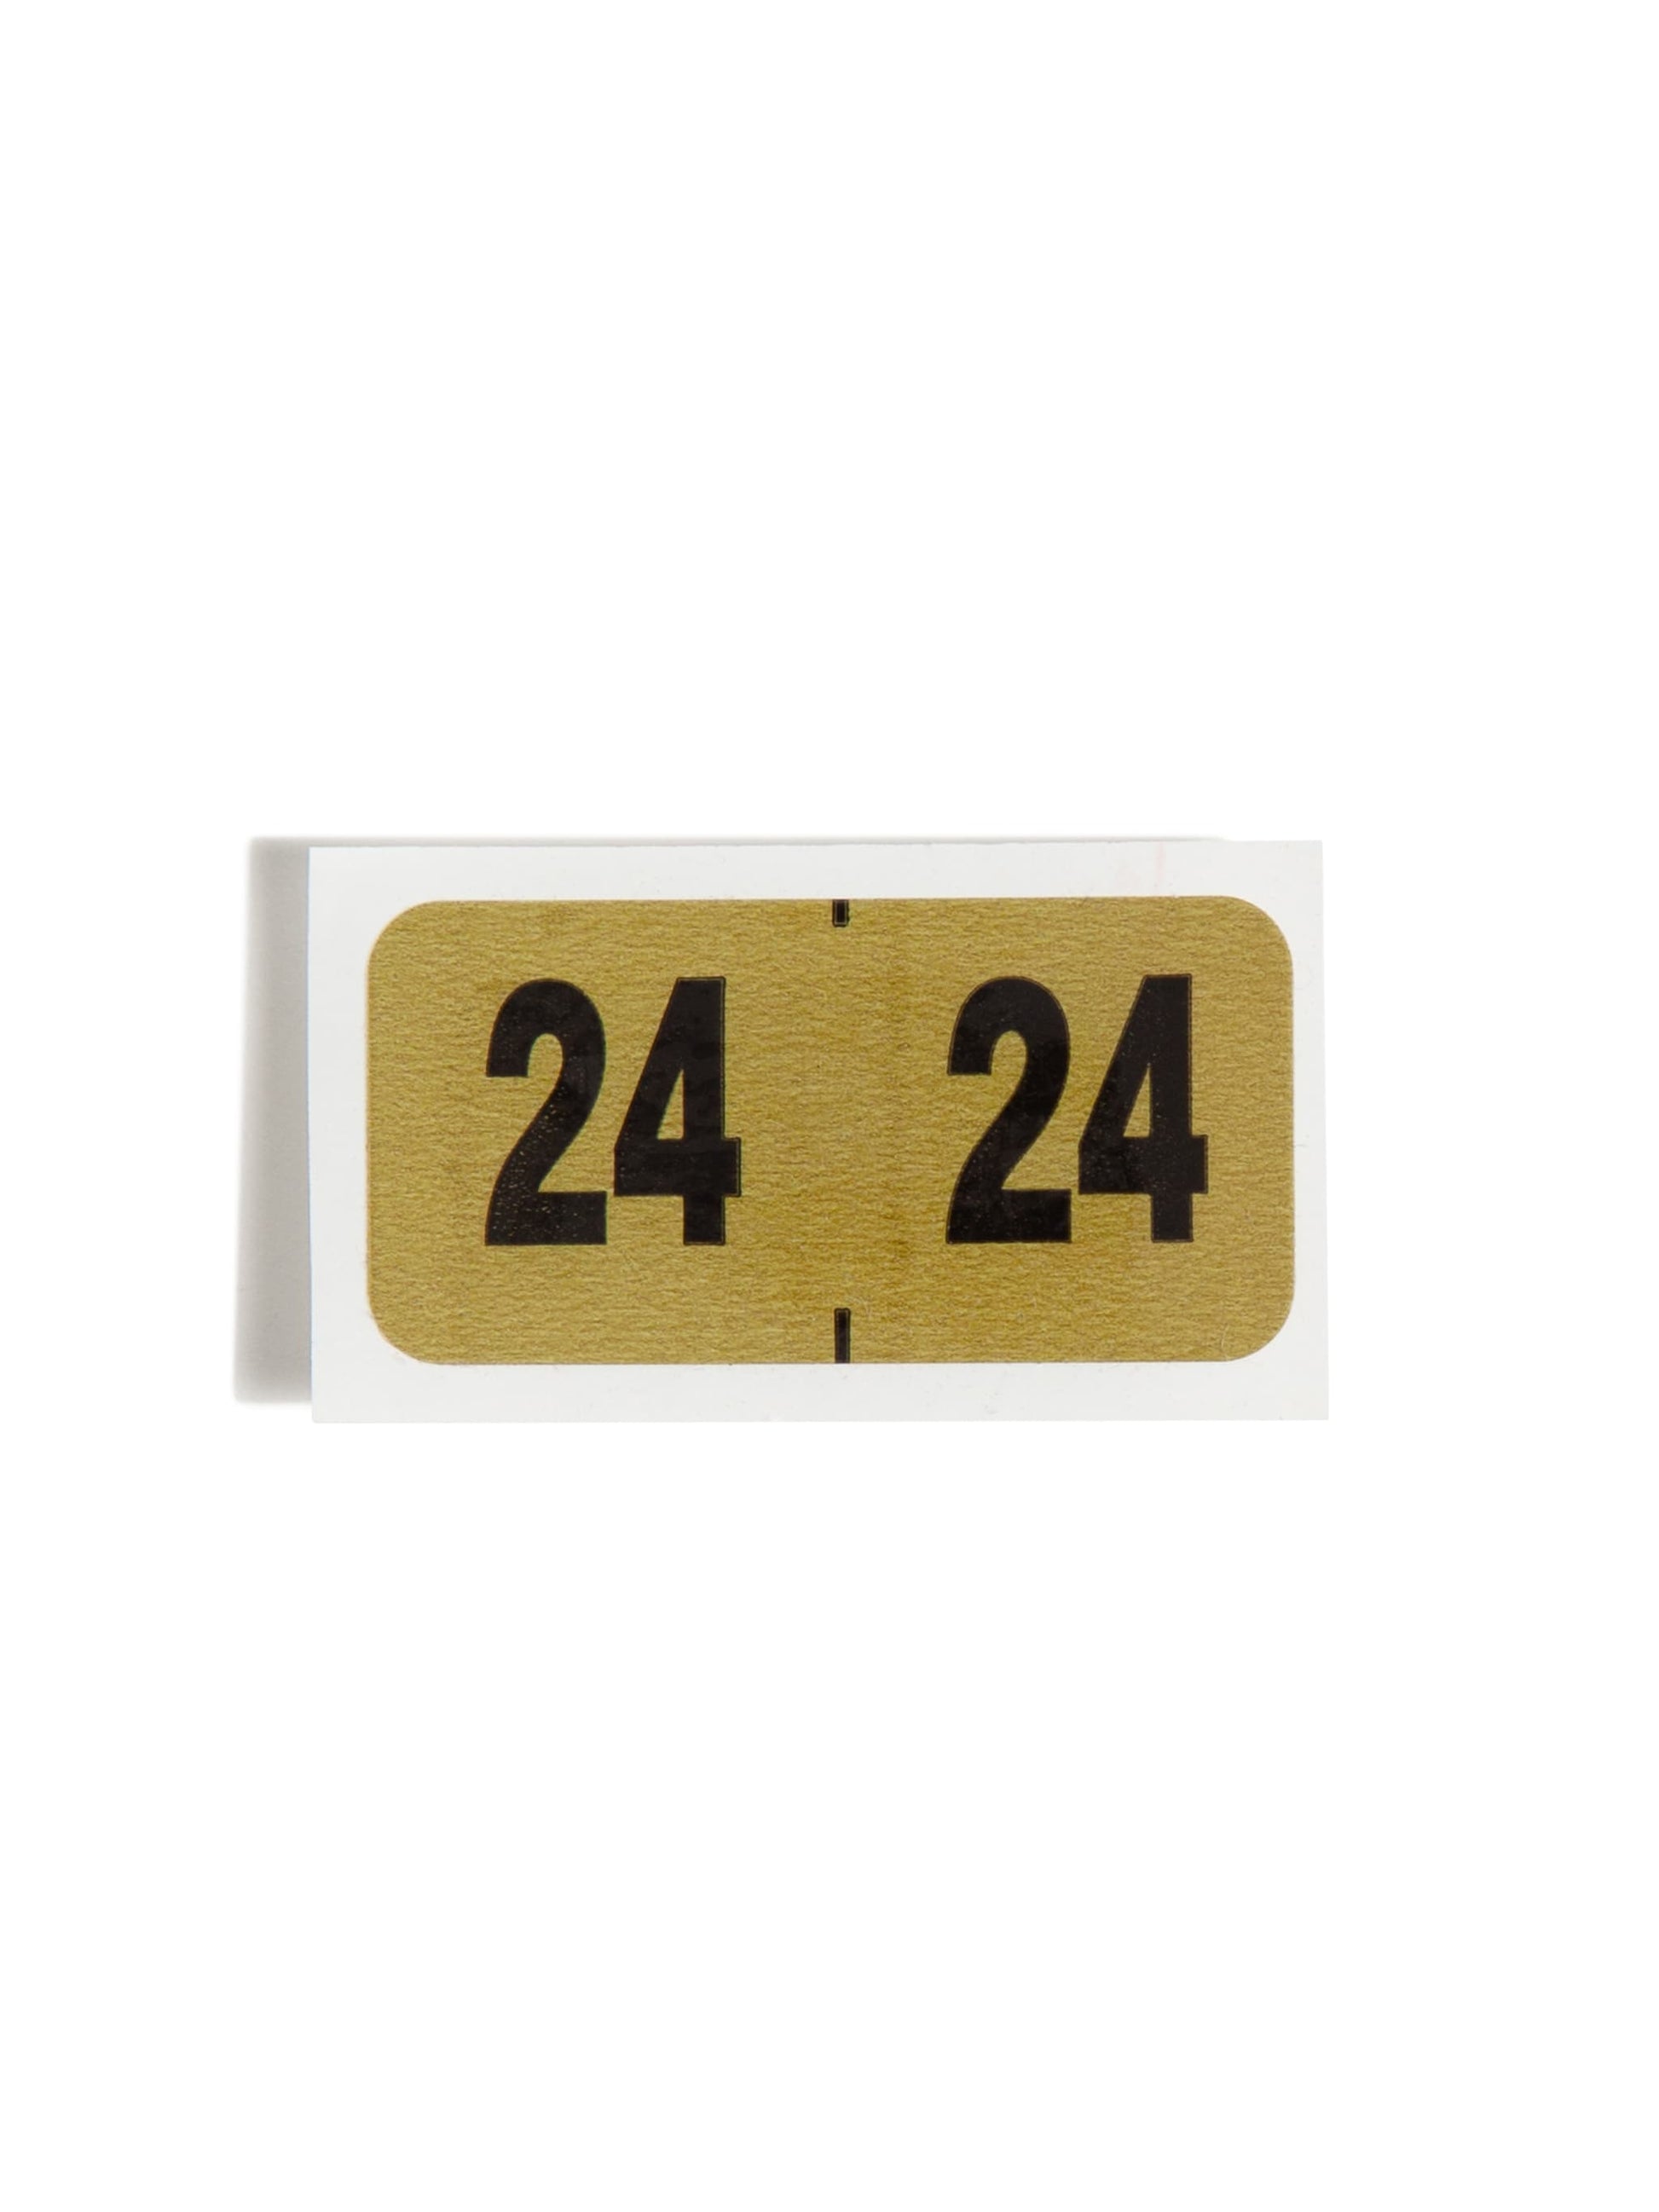 Color-Coded Year Labels, Gold Color, 1-1/2" X 3/4" Size, Set of 1, 086486683241